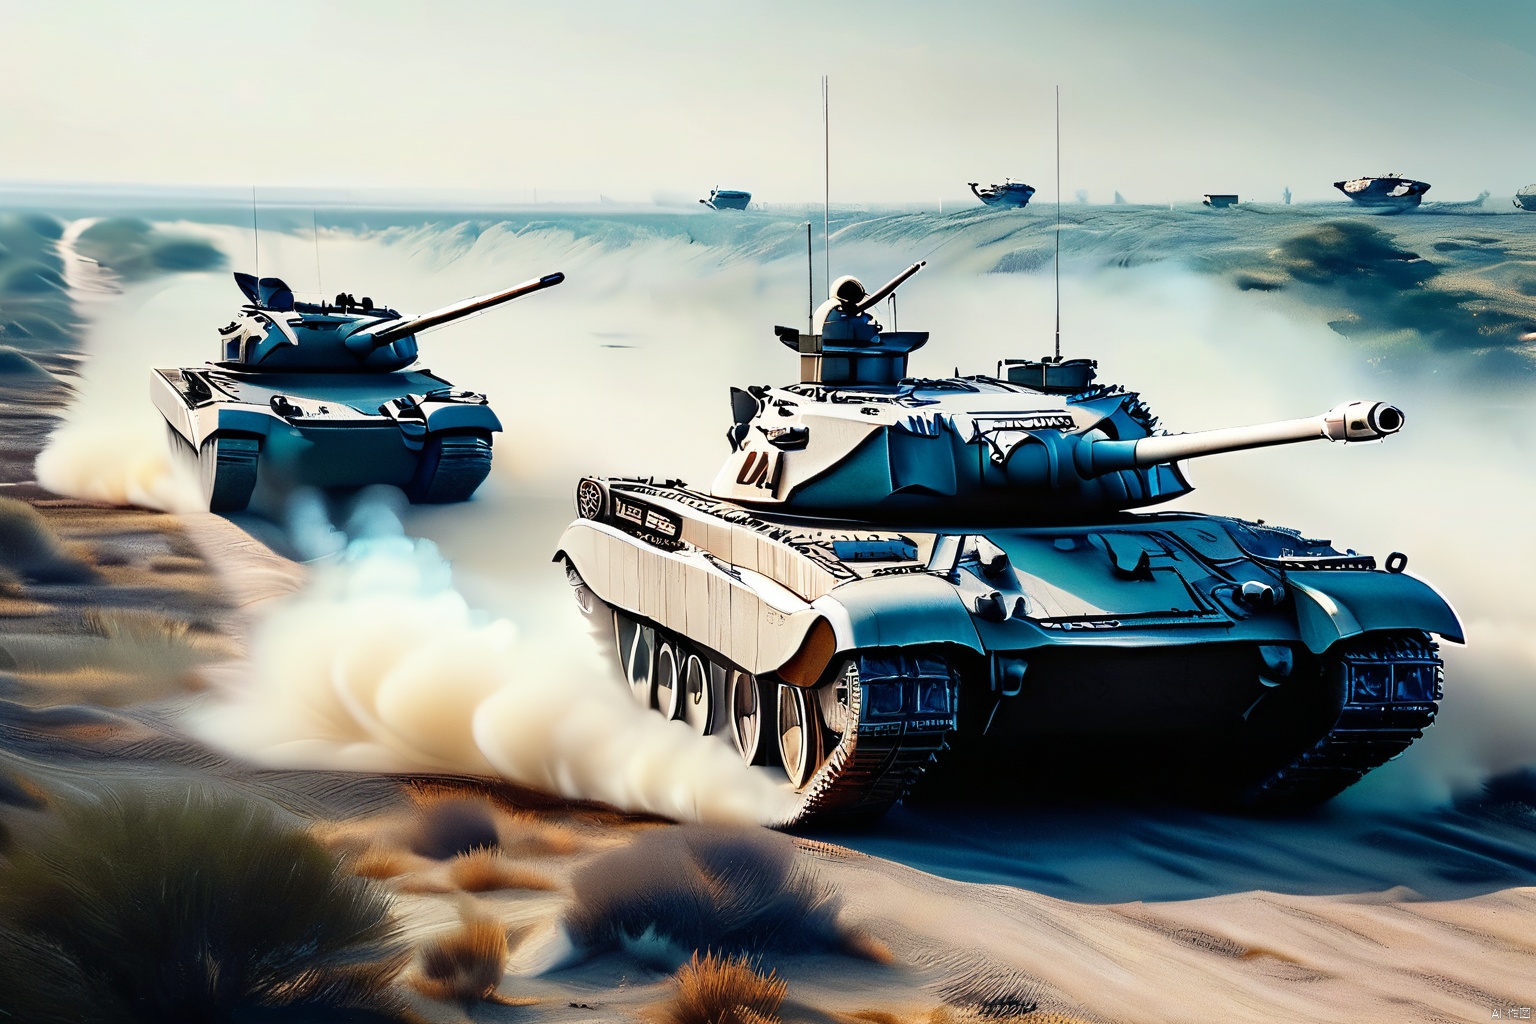  masterpiece, best quality,breathtaking perspectives, movie stills, overhead shot,((the complete picture of five modern main battle tanks, coming from the front)),with sturdy armor and powerful firepower, wide tracks, towering turrets and thick armor plates, 1 machine gun,as well as patterns and details on the tracks, camouflage coating, metallic texture, background with explosive smoke, scattered shells, and enemy tanks in the distance